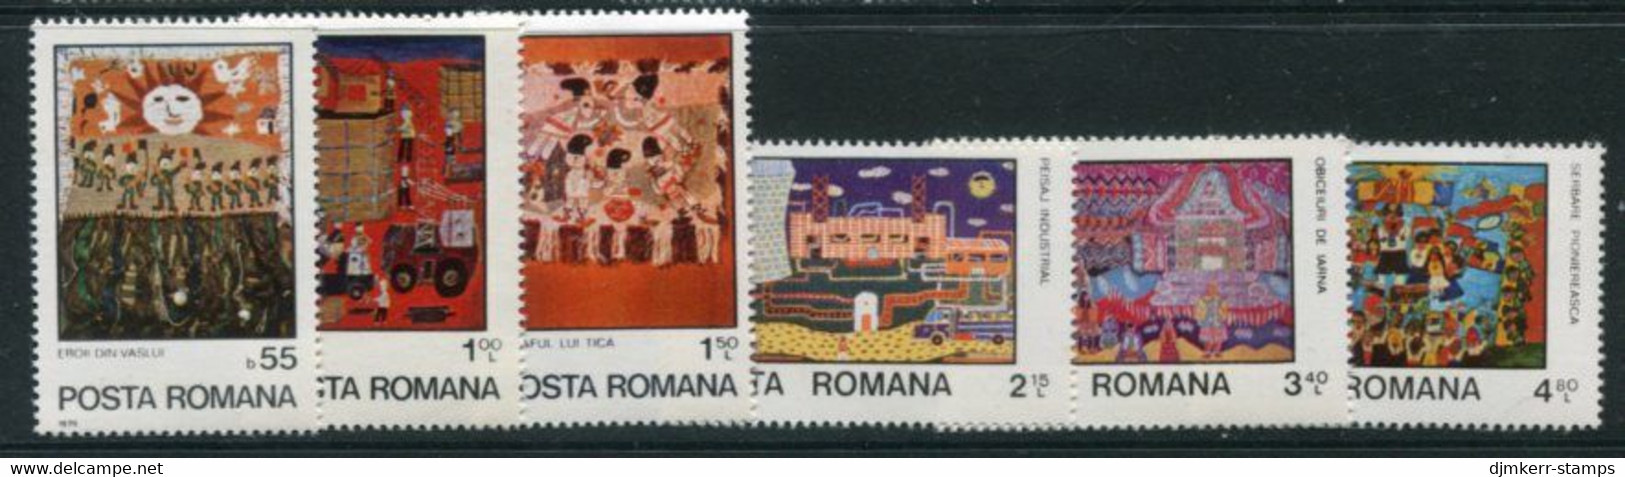 ROMANIA 1979 Year Of The Child I MNH / **.  Michel 3573-78 - Unused Stamps